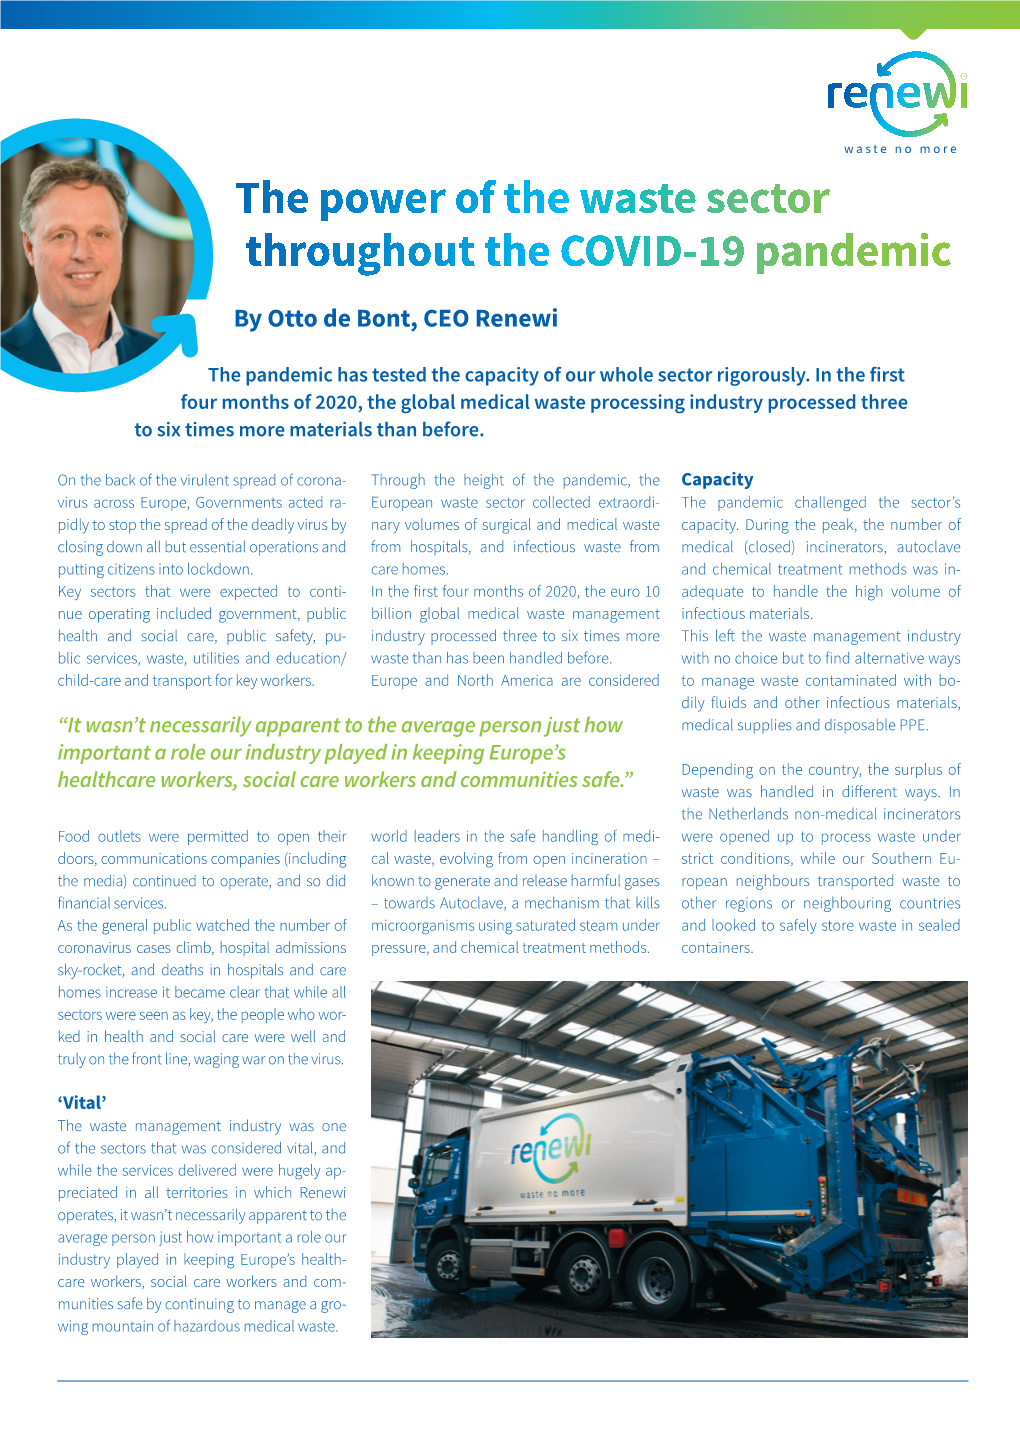 The Power of the Waste Sector Throughout the COVID-19 Pandemic